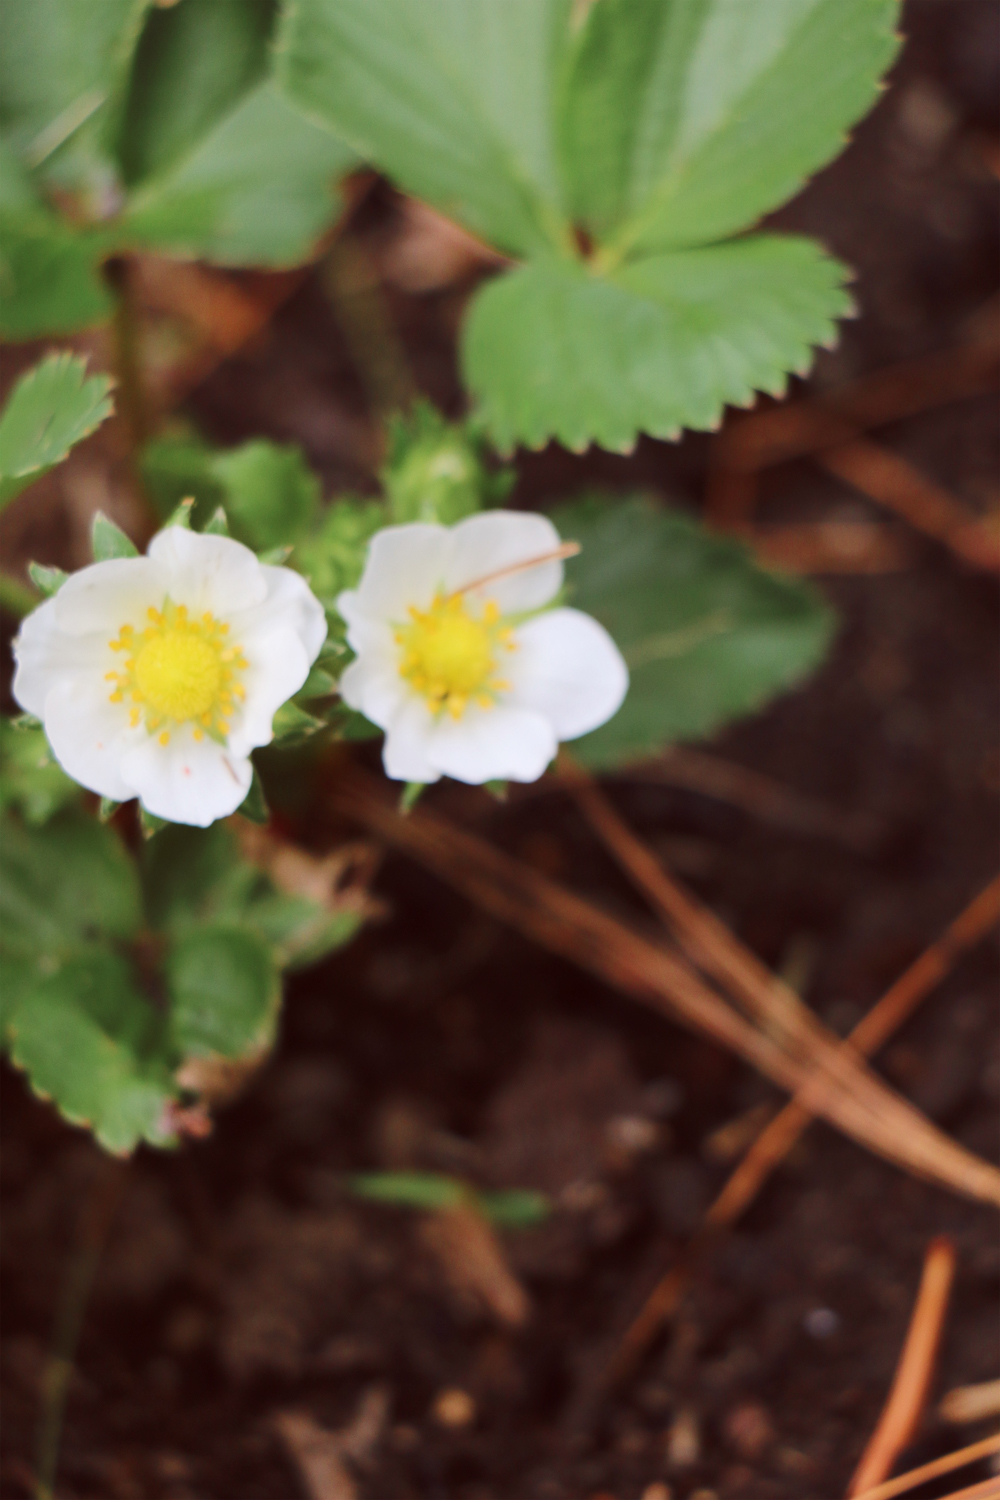 Strawberry blooms - Reclaiming the Vegetable patch. An easy makeover.